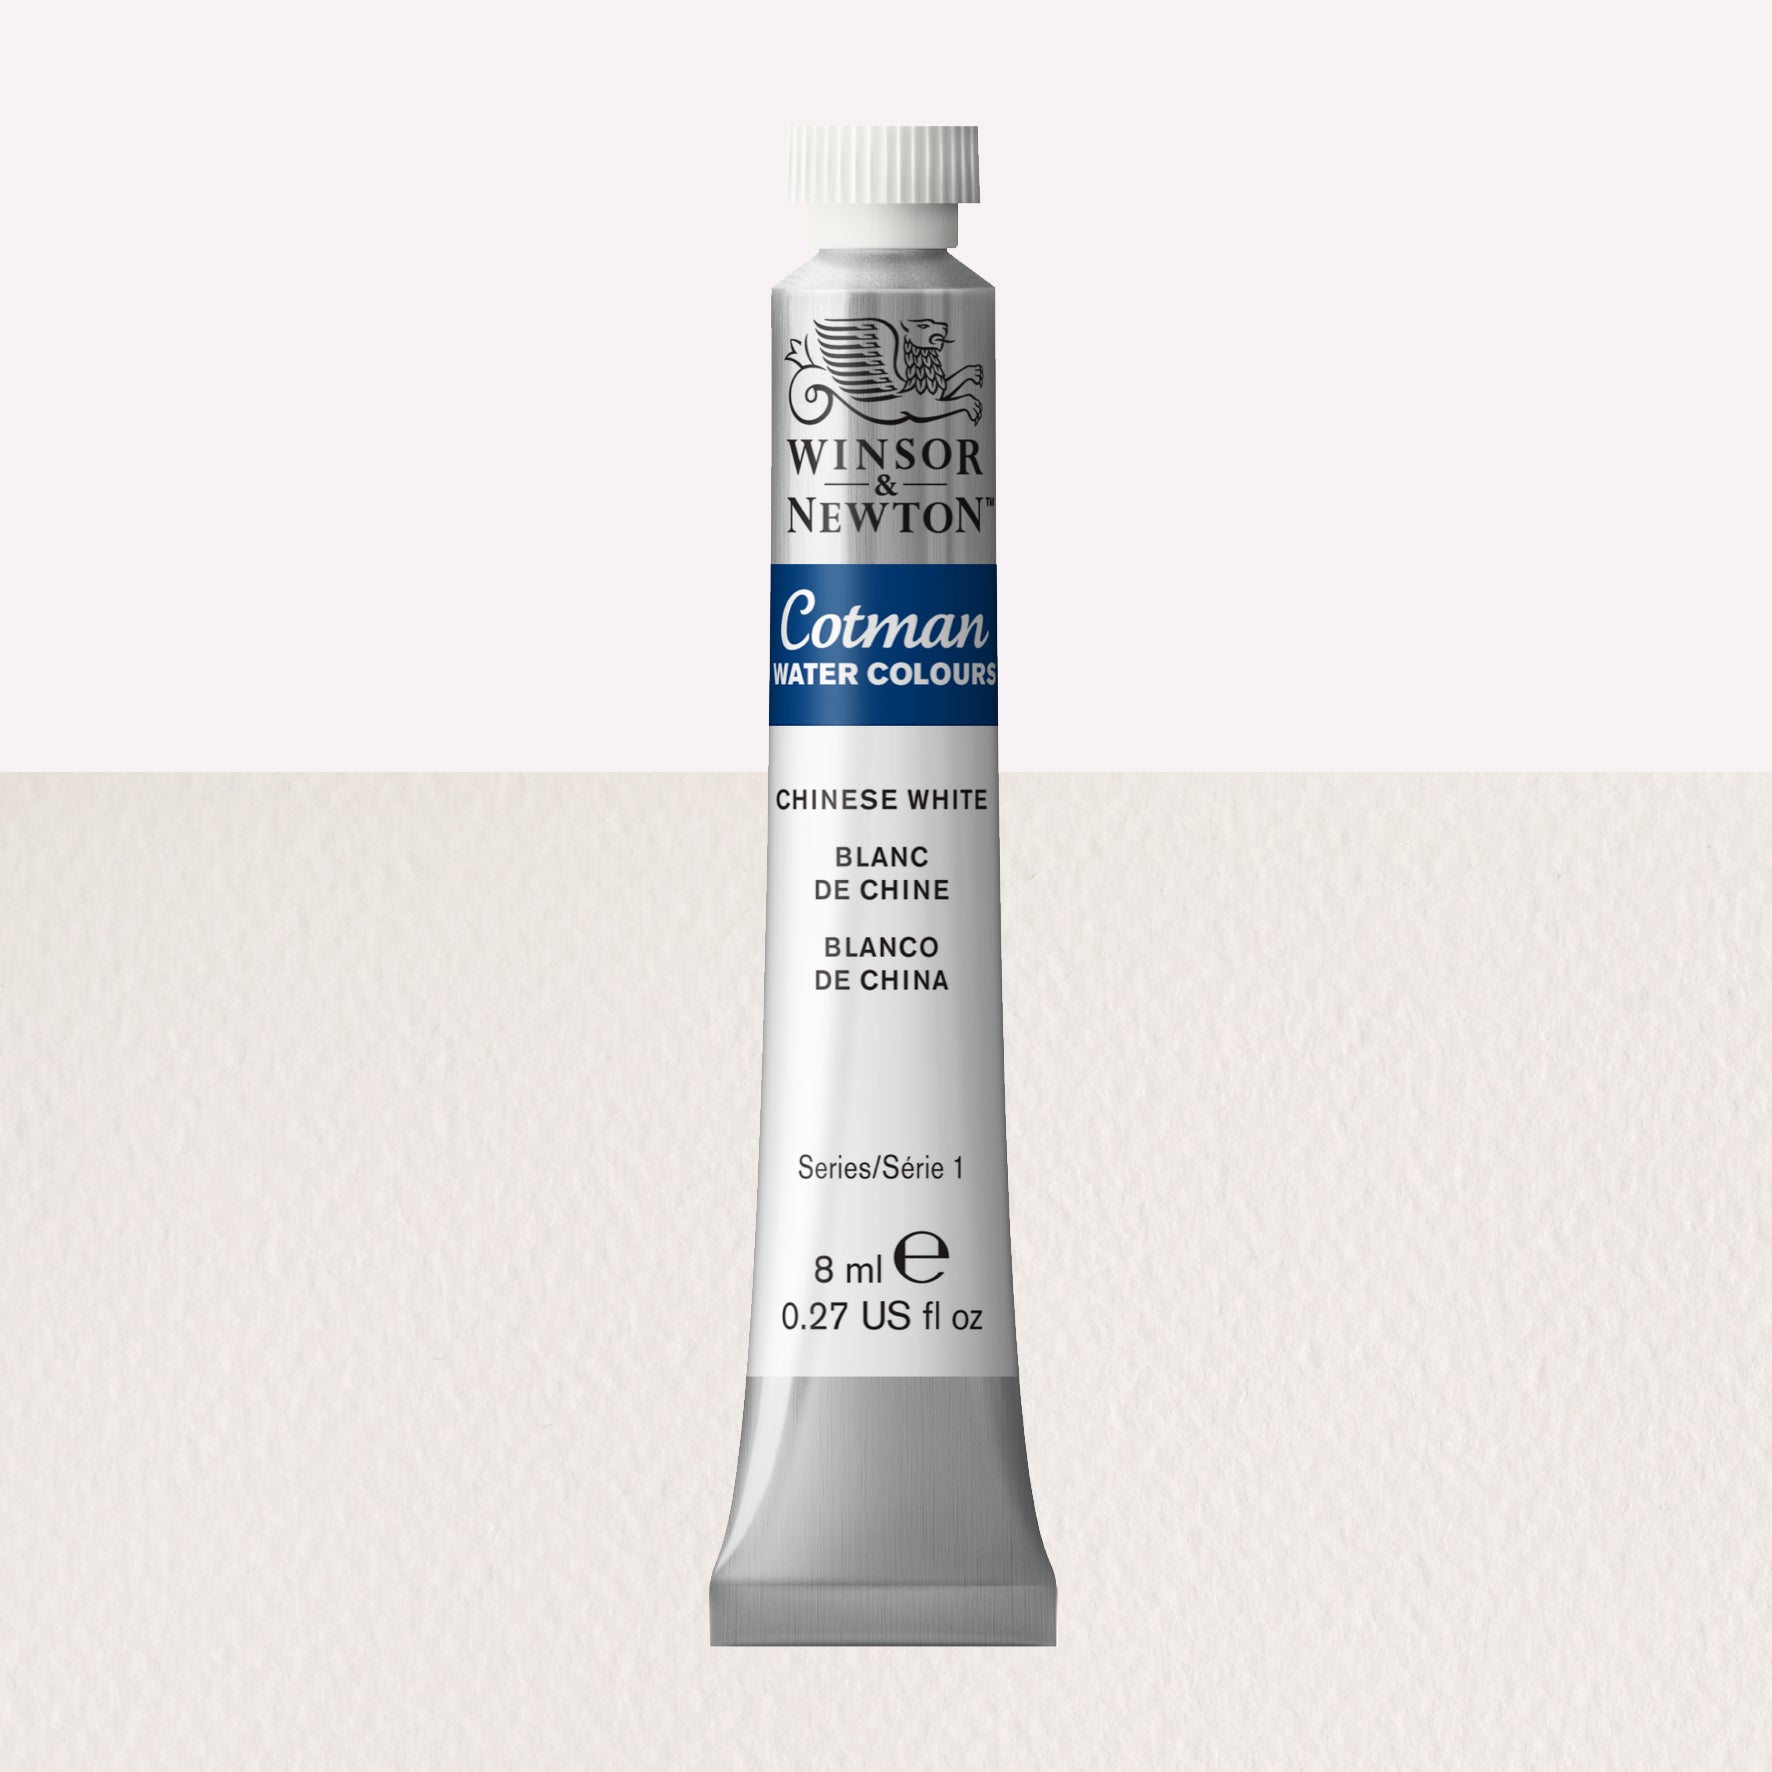 Winsor & Newton Cotman watercolour paint packaged in 8ml silver tube with a white lid in the shade Chinese White over a highly pigmented colour swatch.